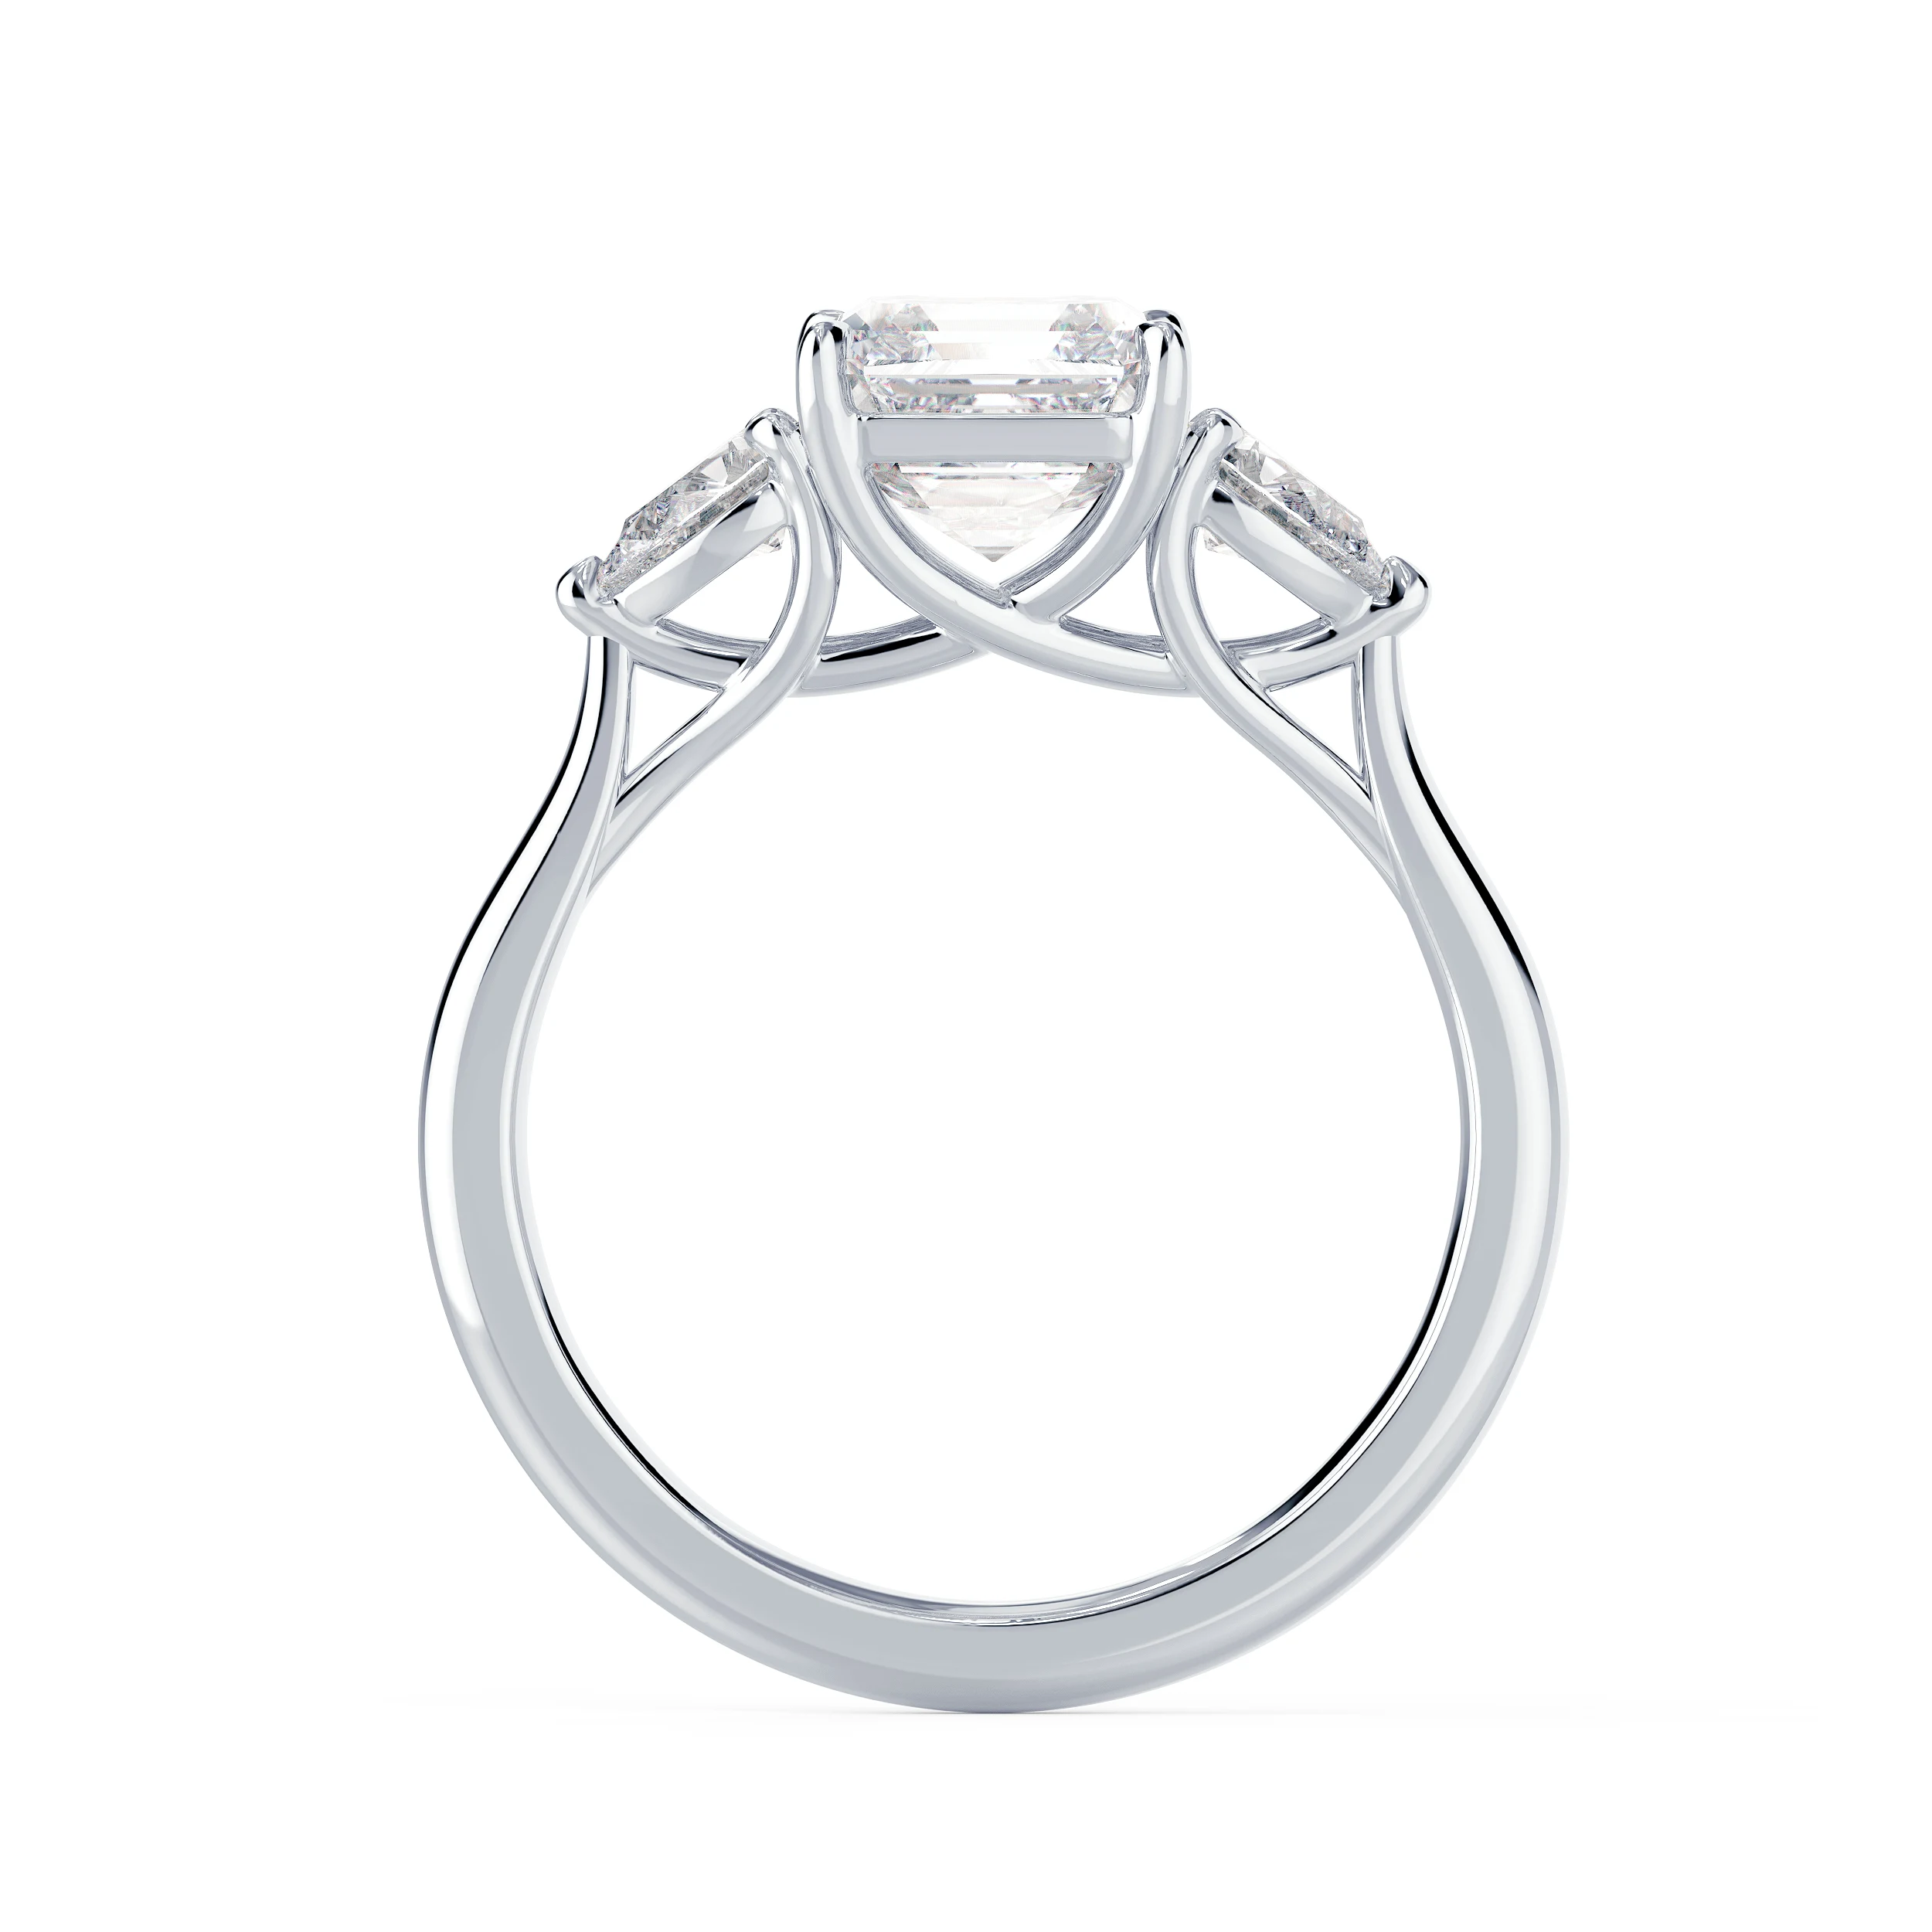 White Gold Asscher and Pear Diamond Engagement Ring featuring Exceptional Quality Diamonds (Profile View)